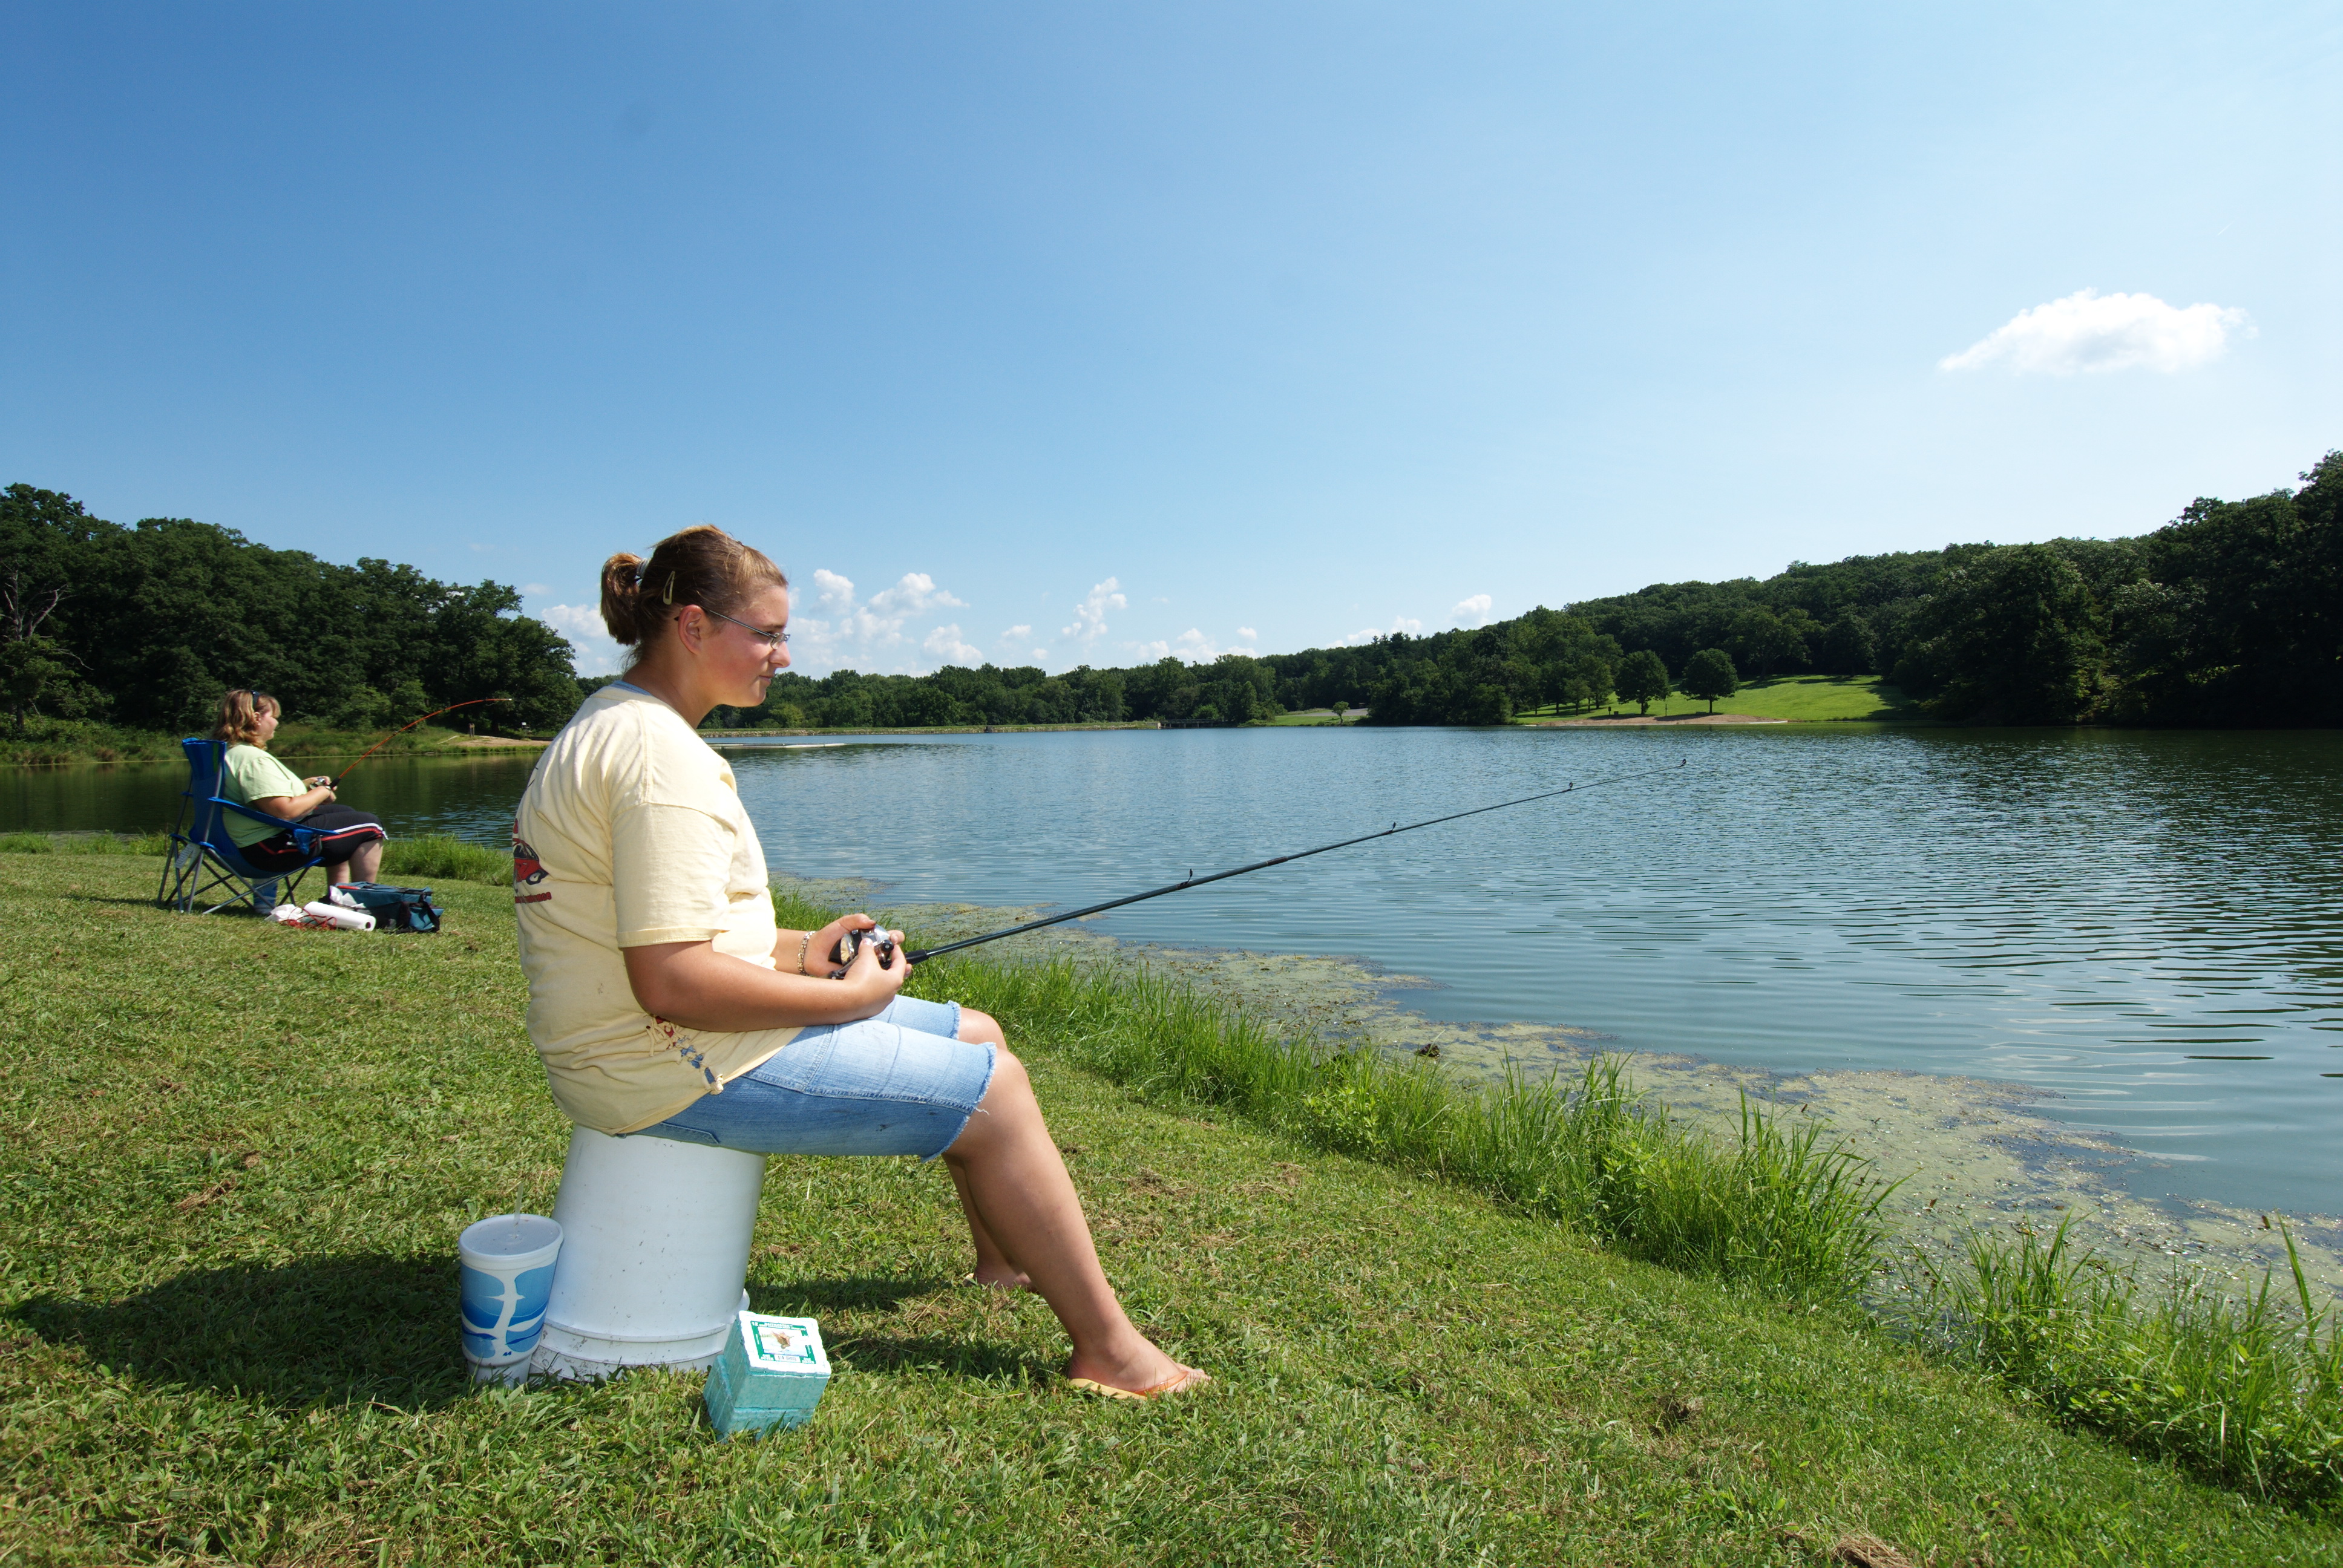 a lady sitting on a bucket along the shore of the lake fishing